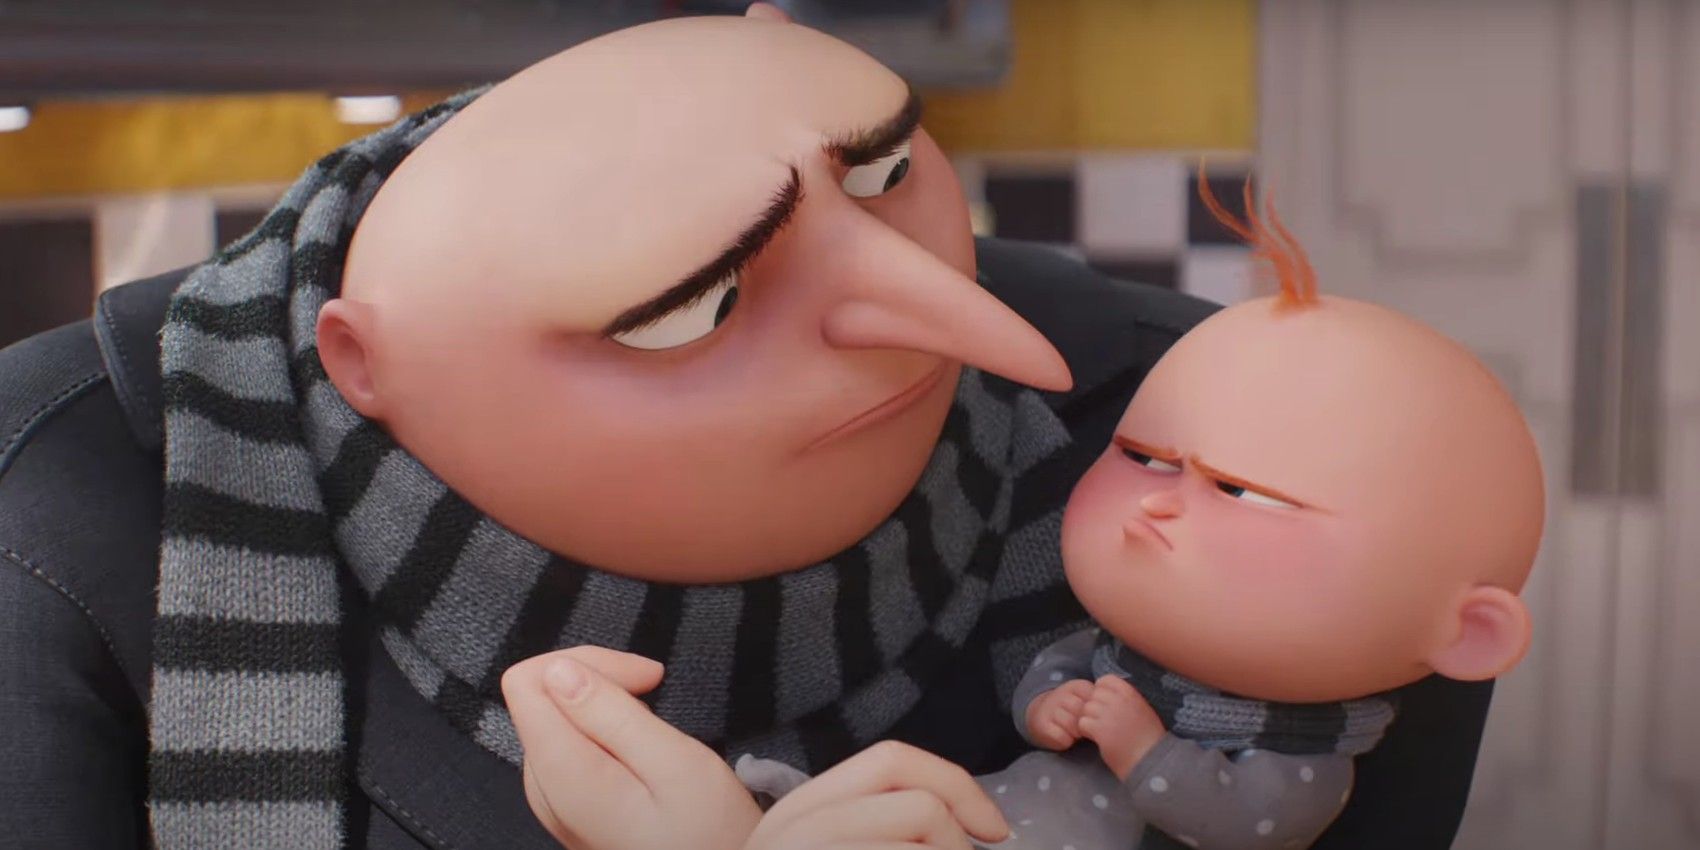 Minions: The Rise of Gru (Film, Comedy): Reviews, Ratings, Cast